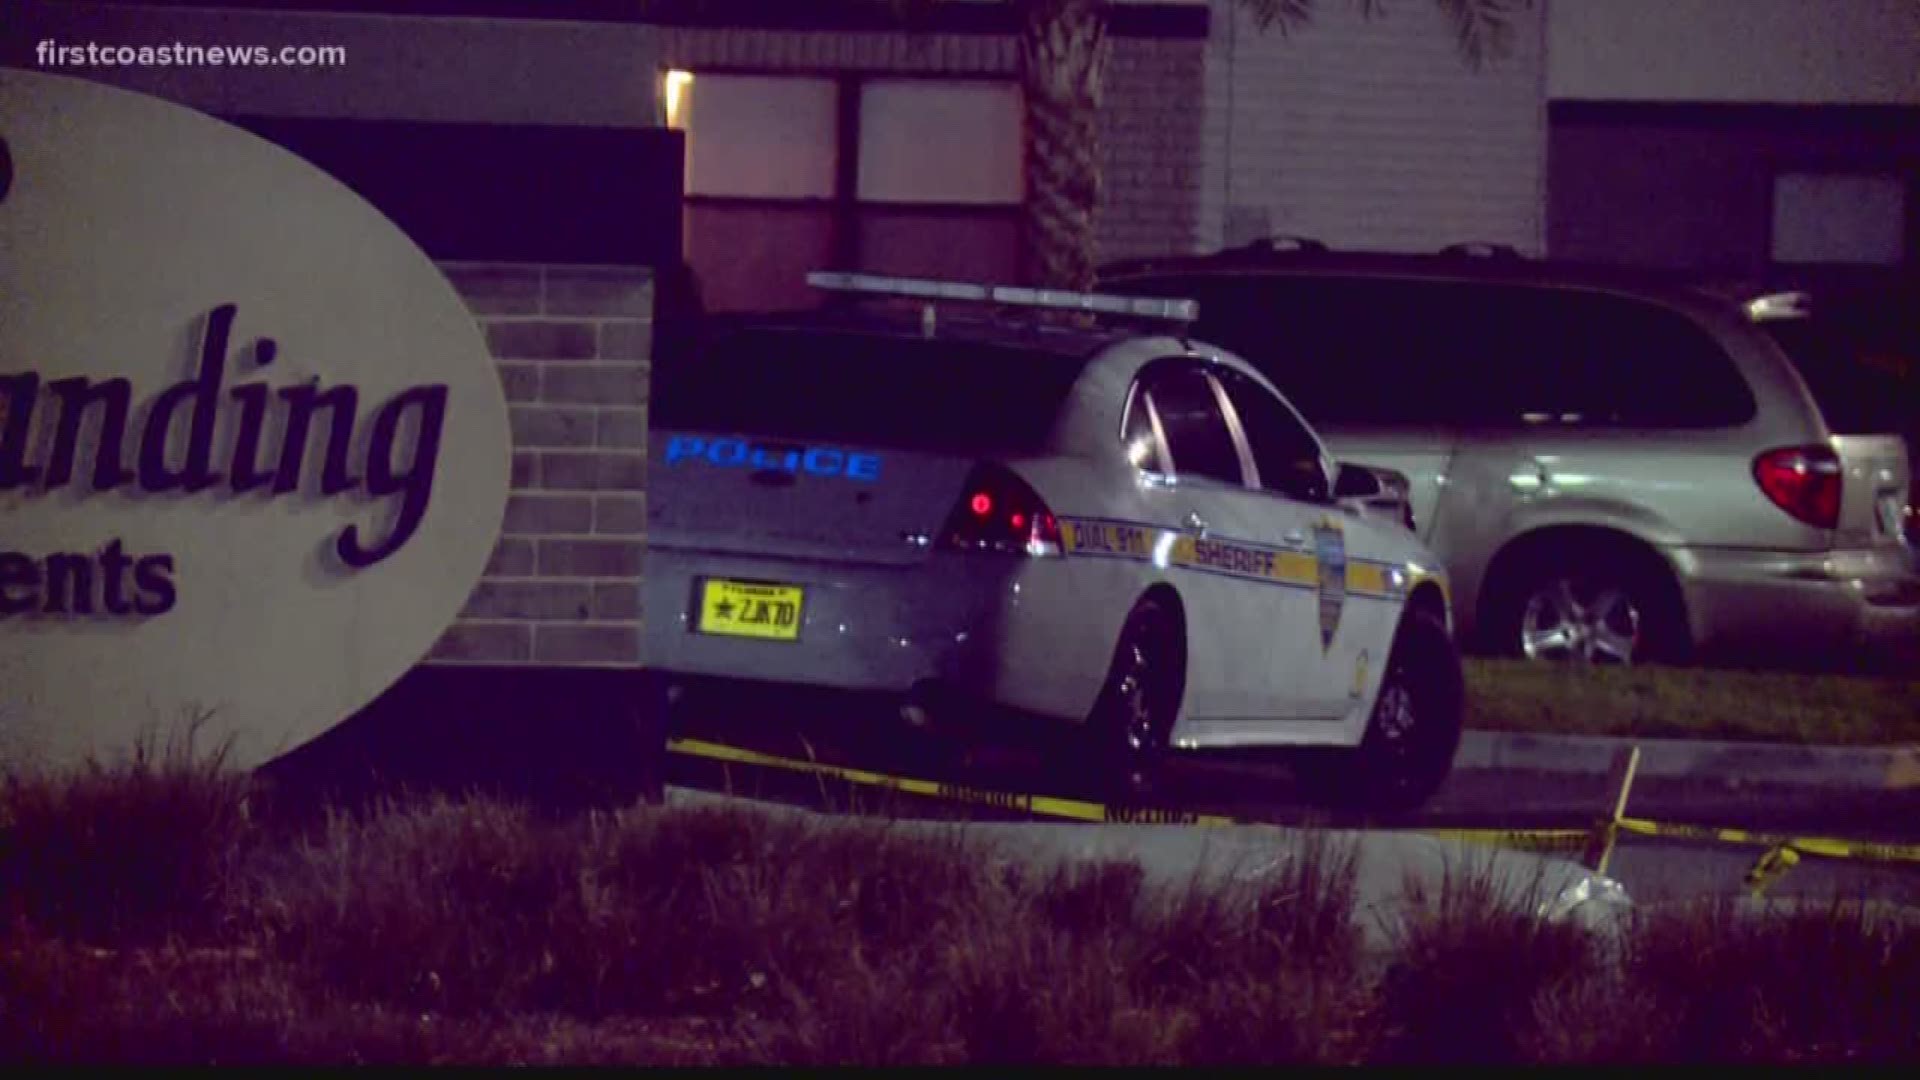 Three men are believed to have been shot at the Vista Landing Apartments, according to police.